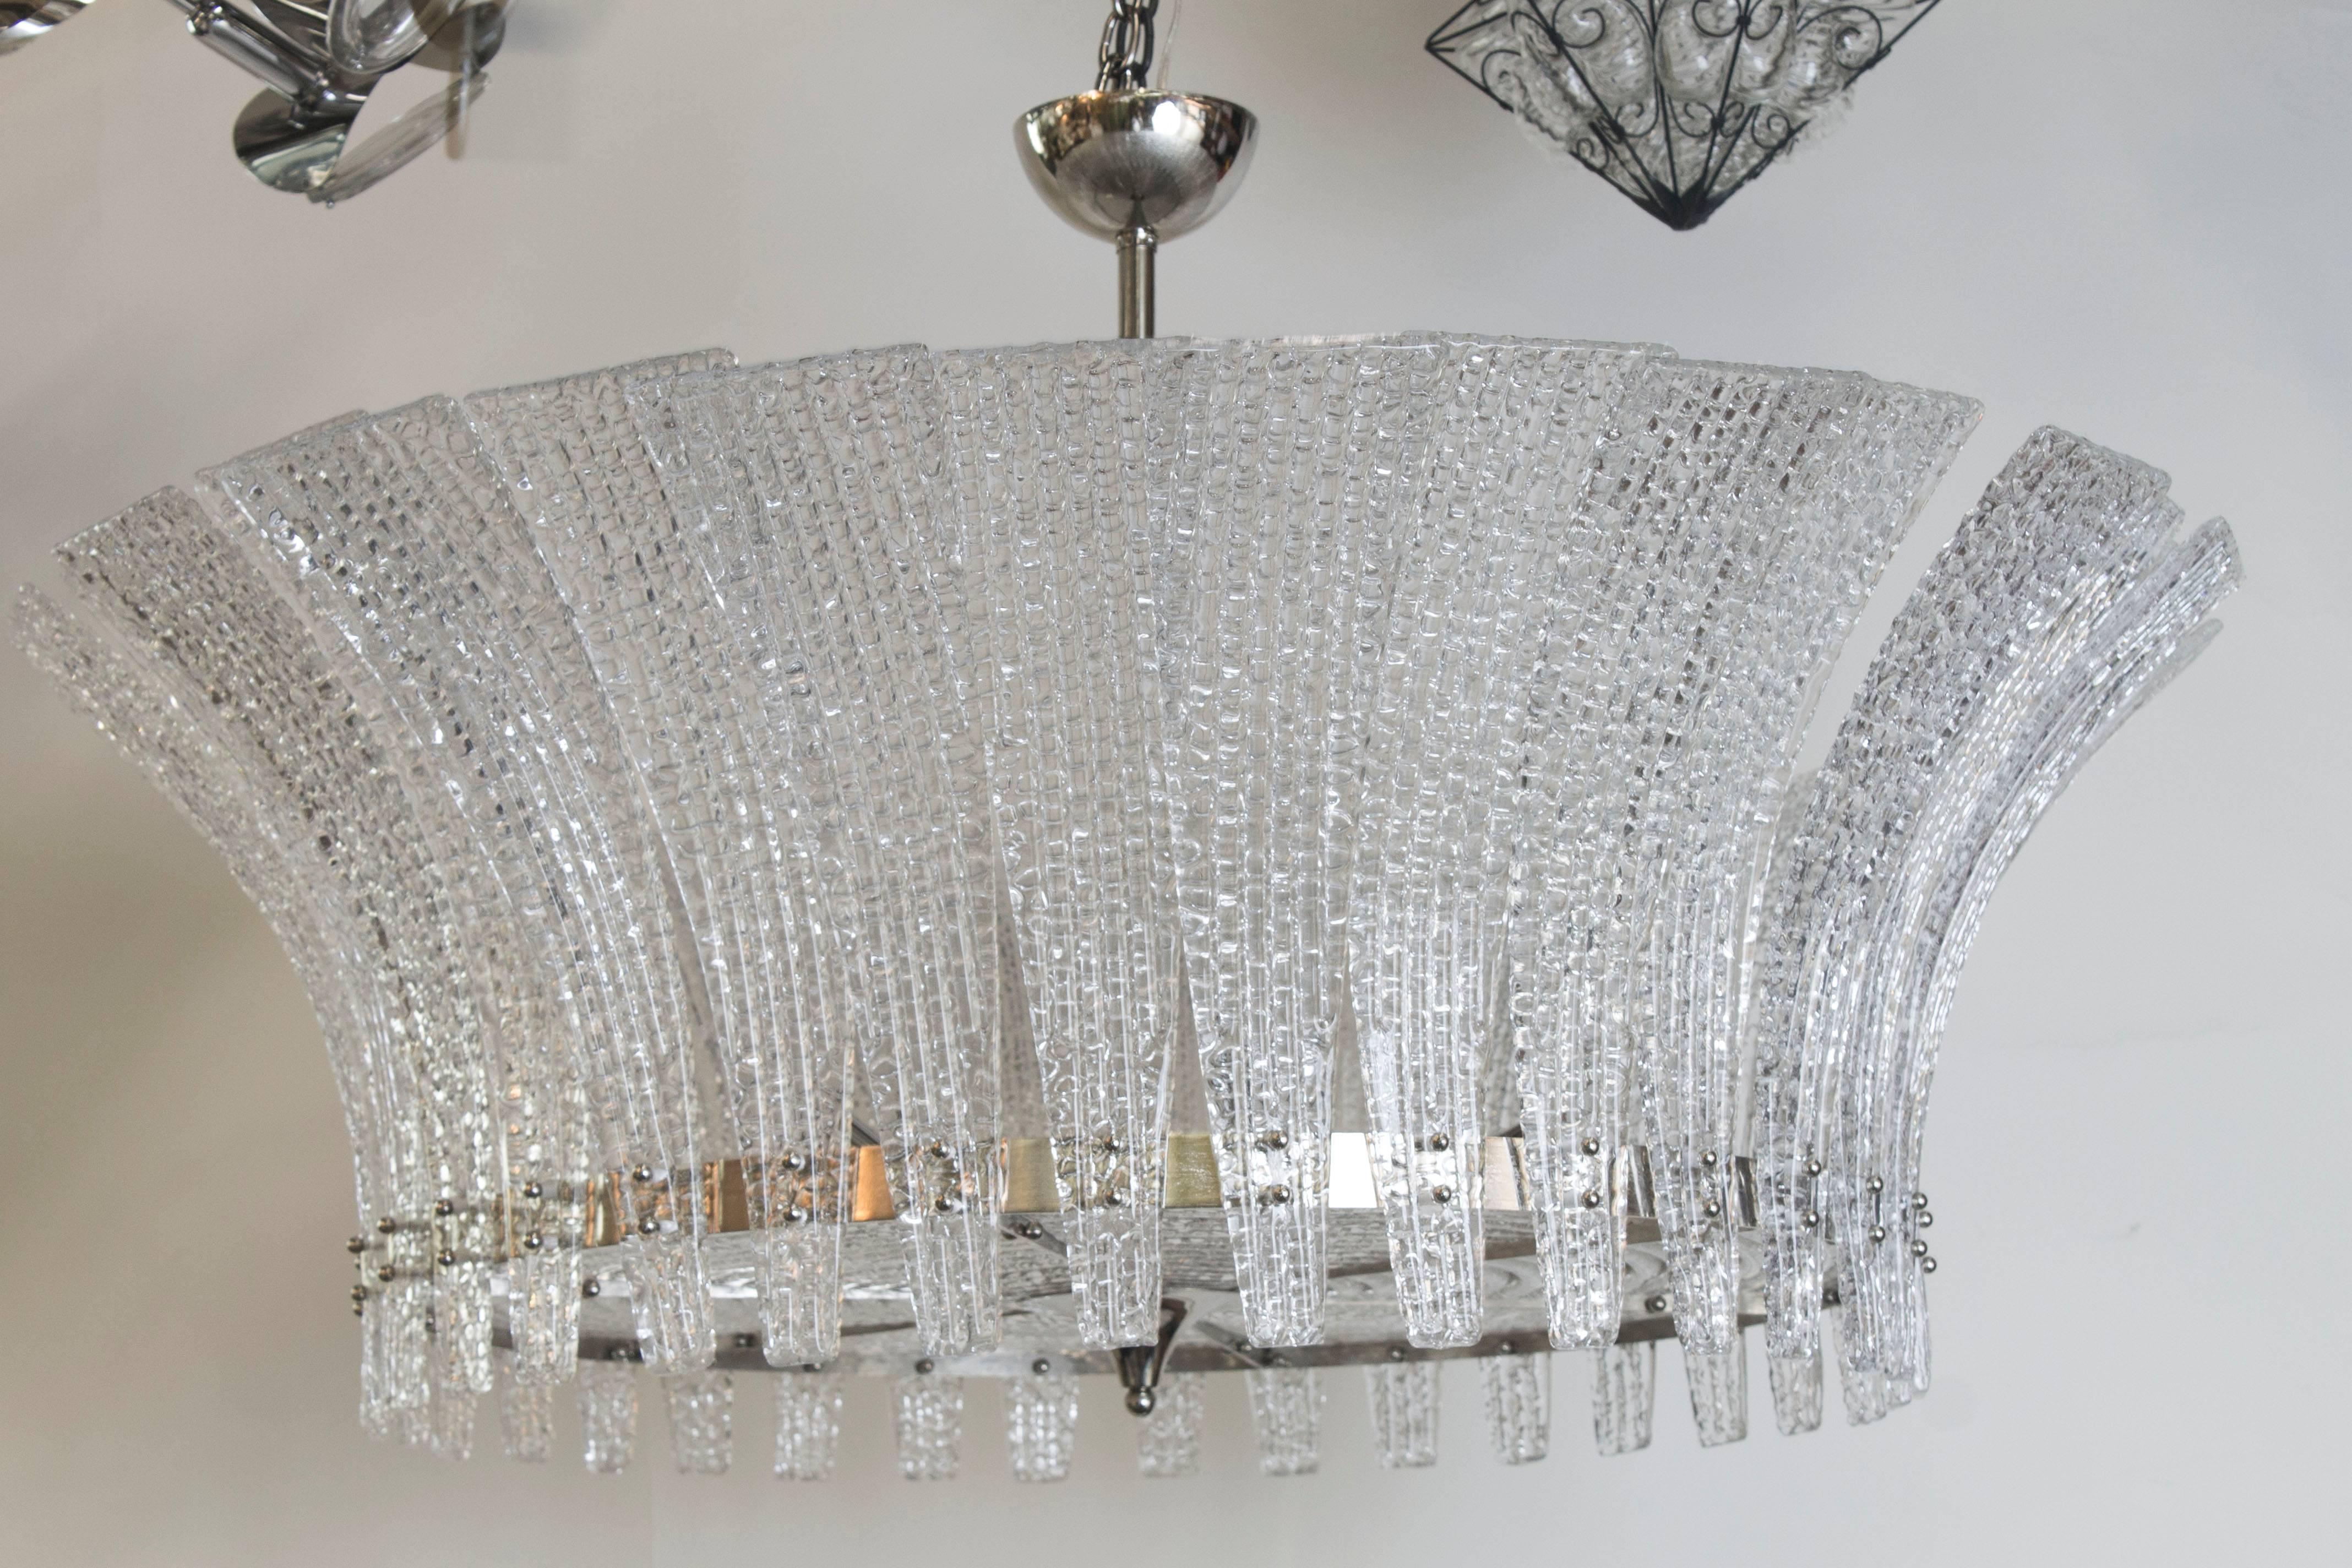 A gorgeous Italian drum chandelier in clear molded Murano glass with a nickel frame and fittings.